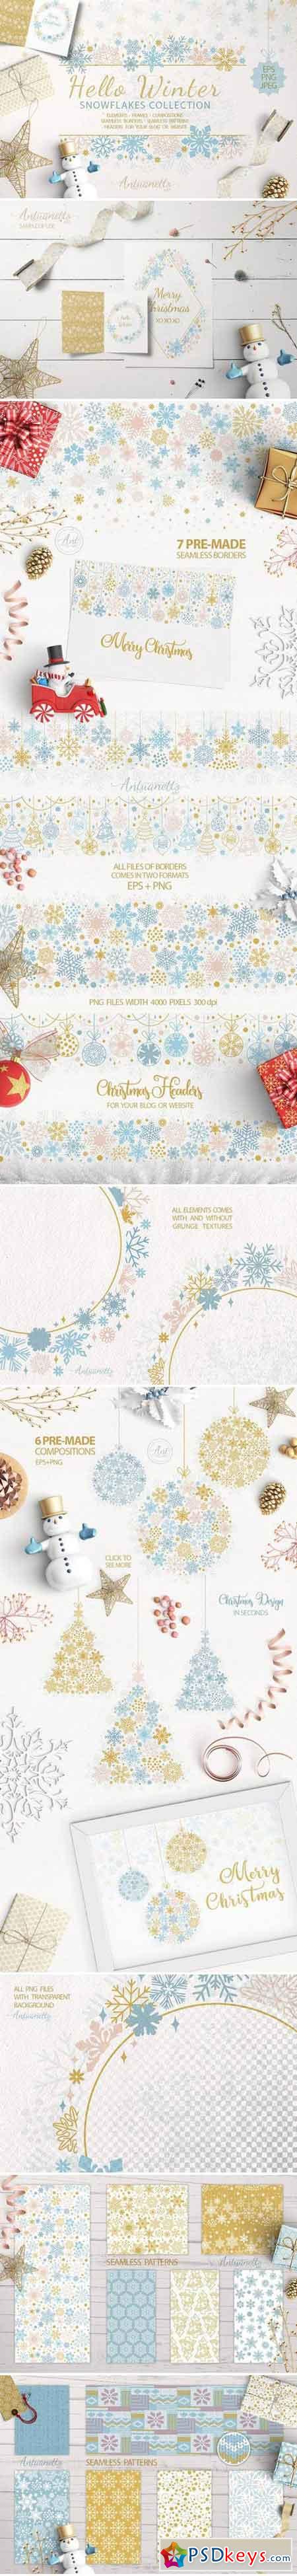 Sparkling snowflakes collection 2104105